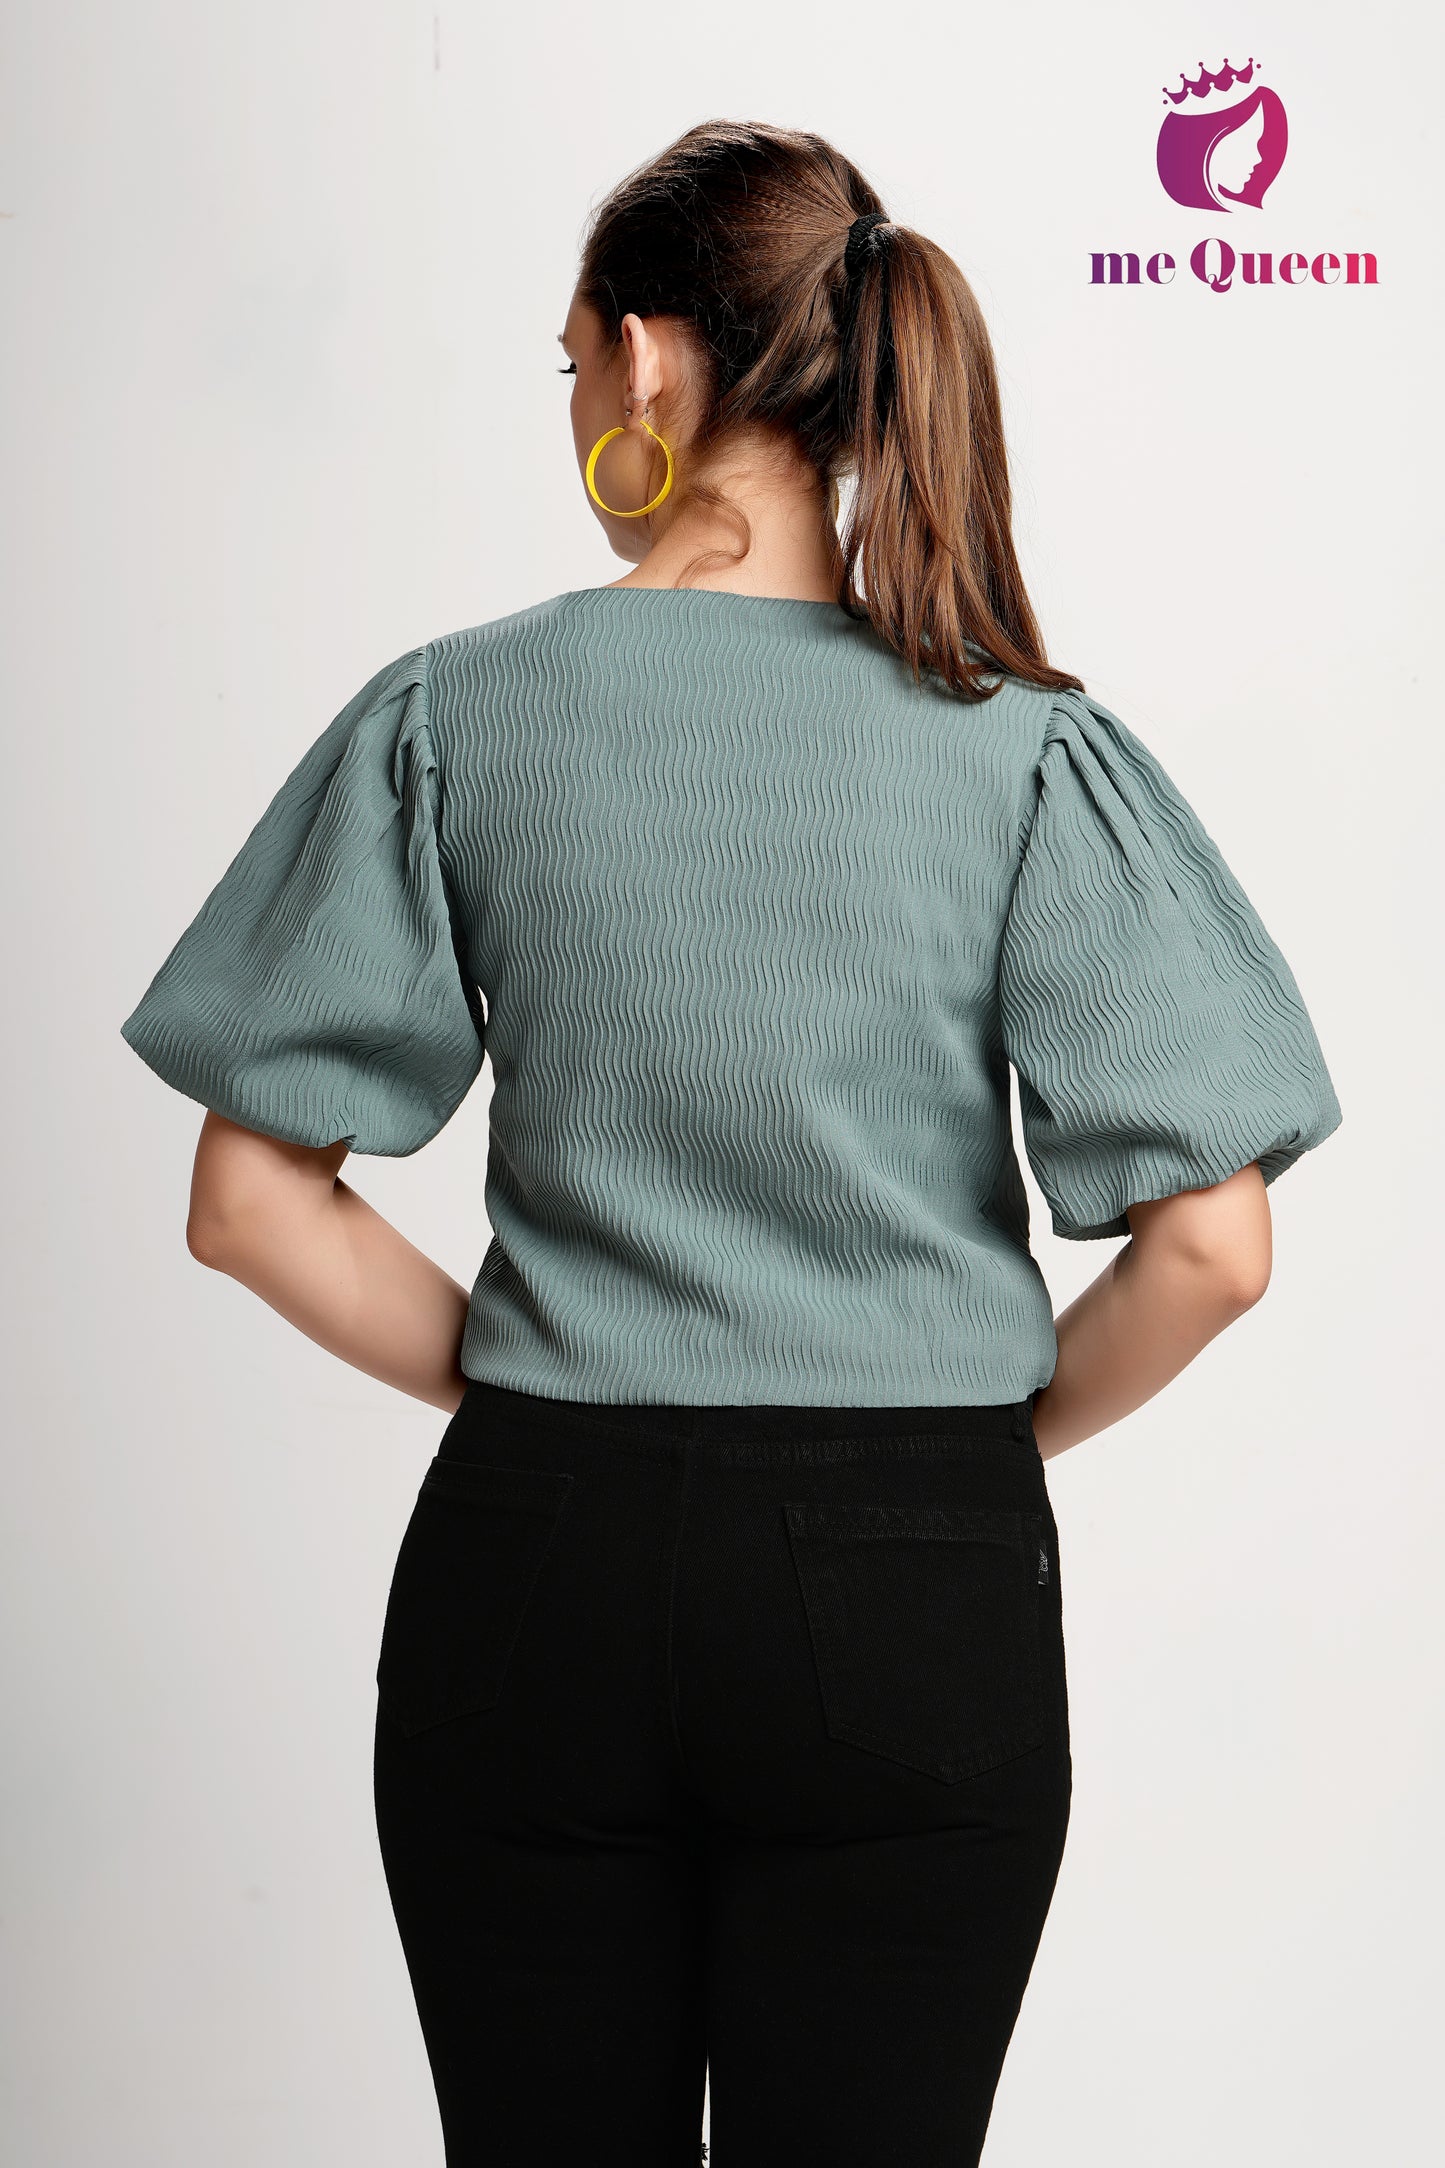 MeQueen's Women's Stylish Pattern Green Top with Puff Sleeves